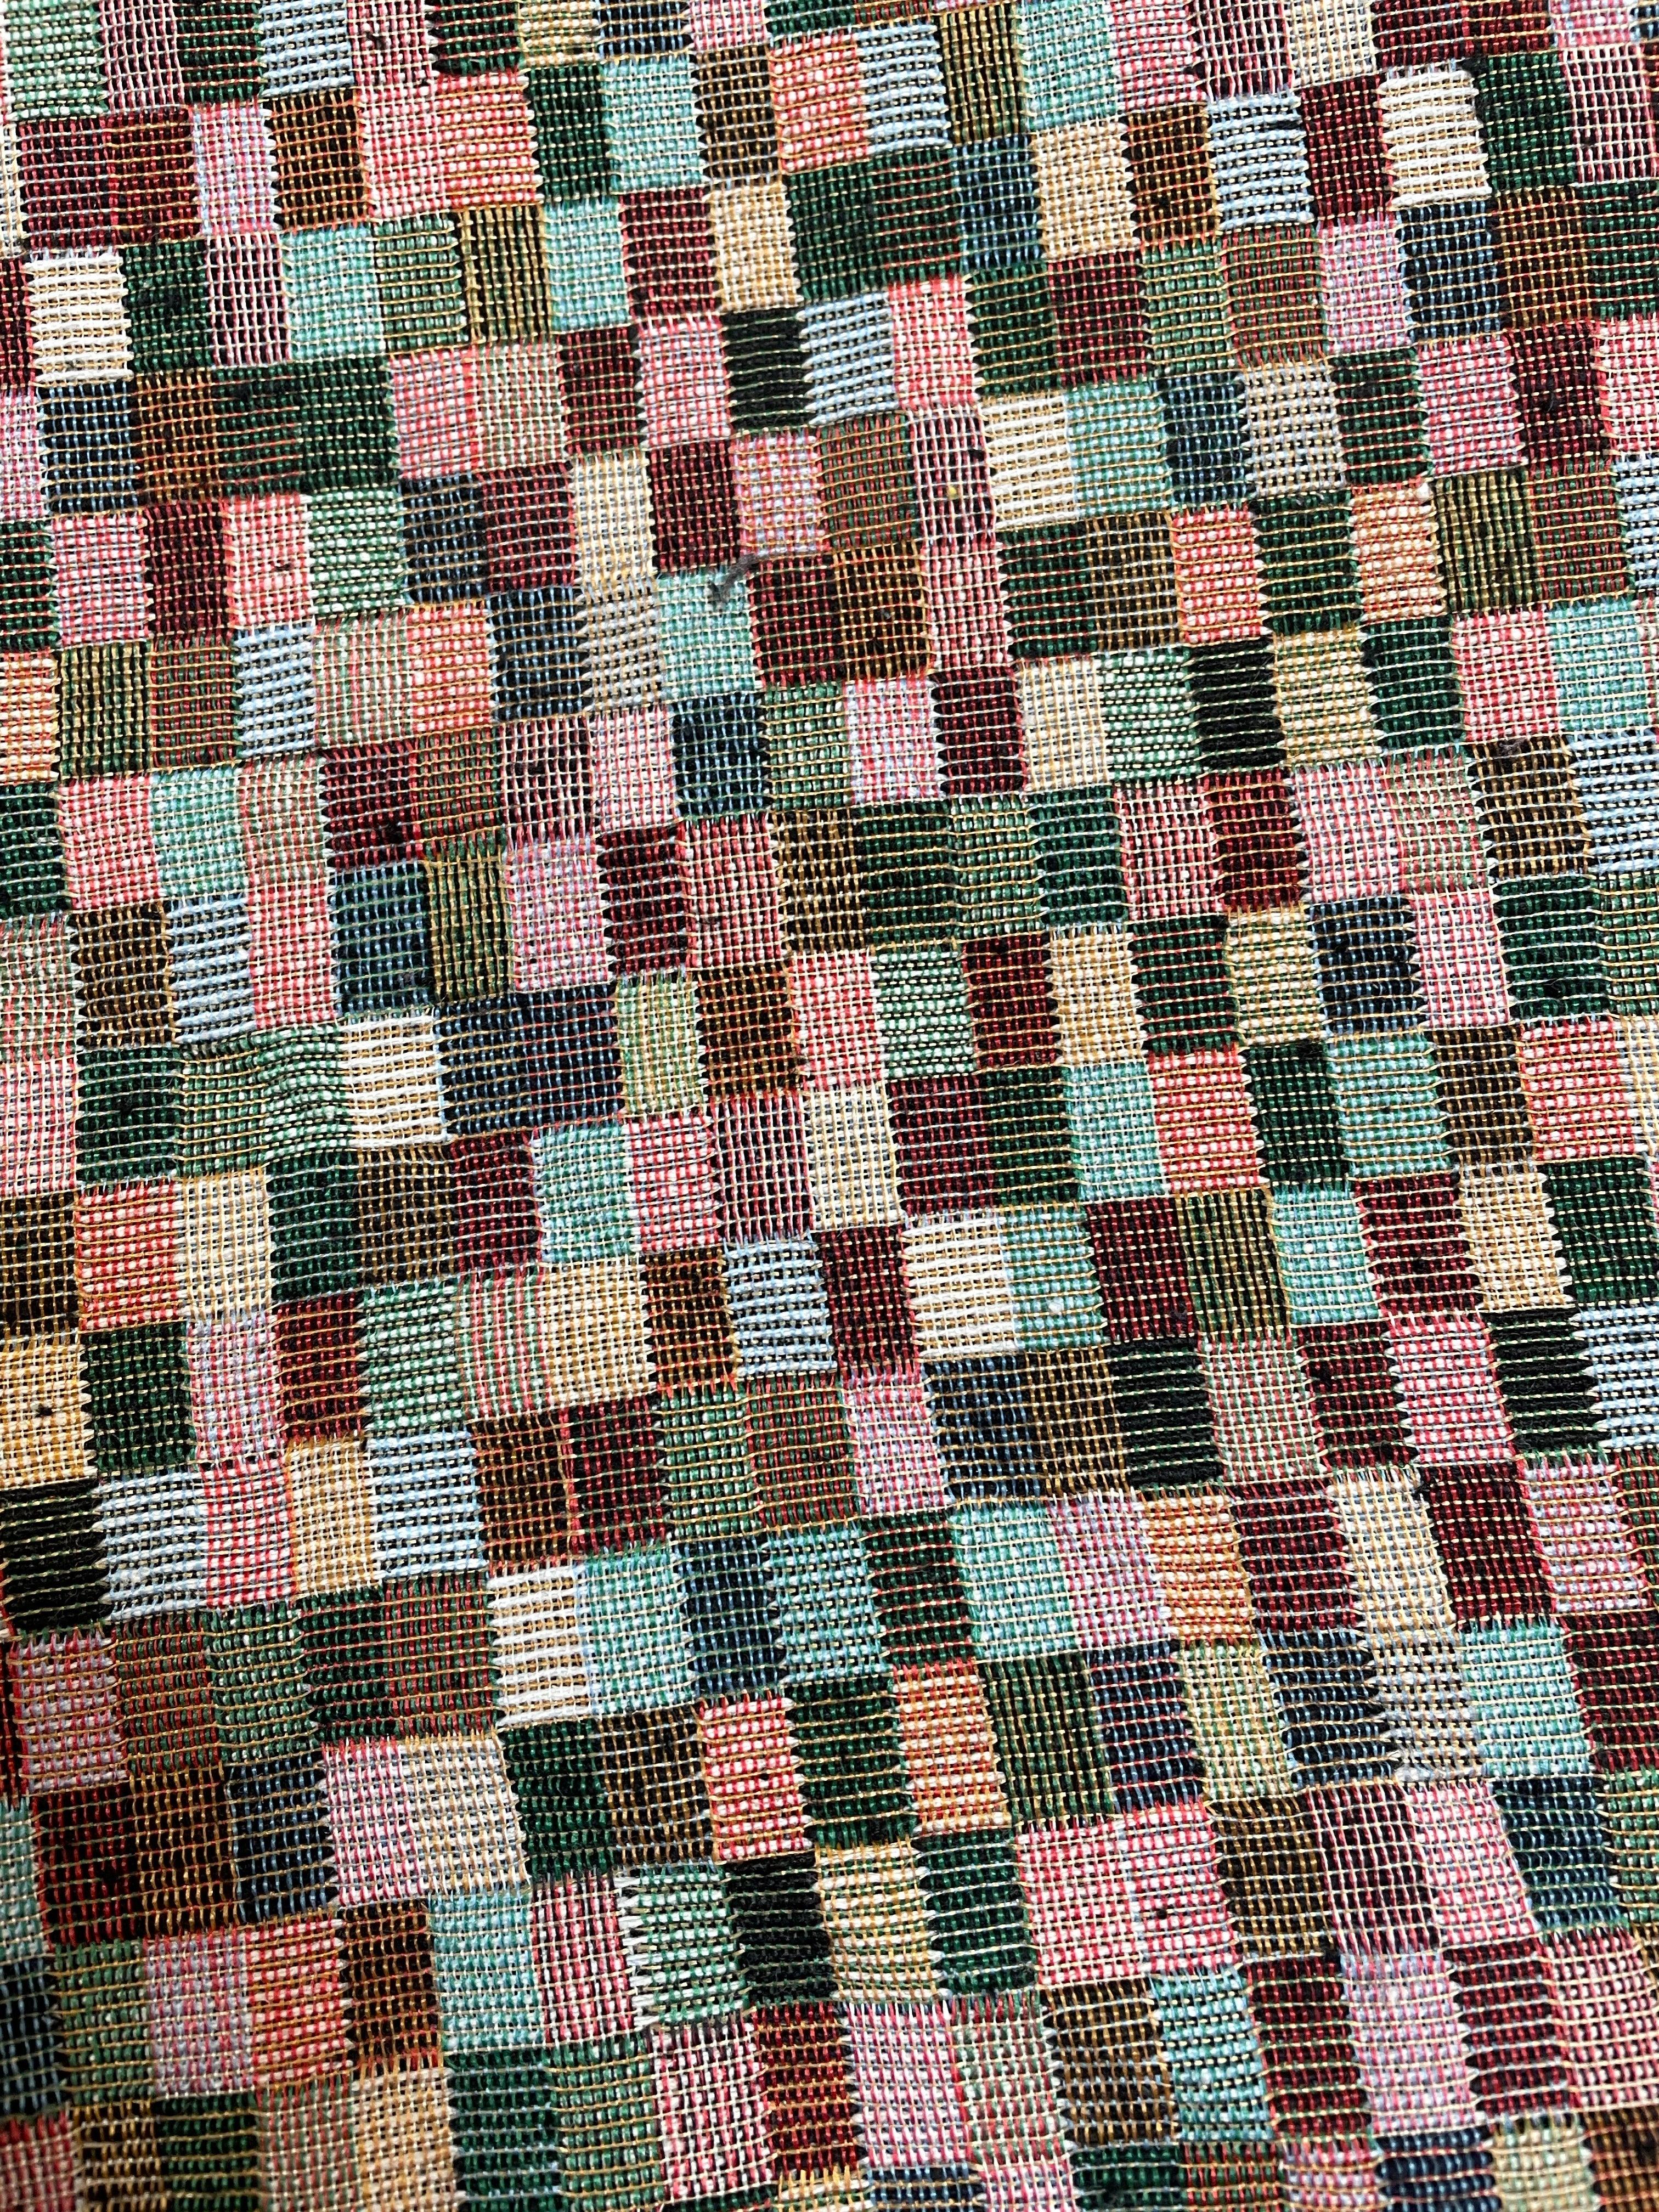 Colourful squares Tapestry Fabric